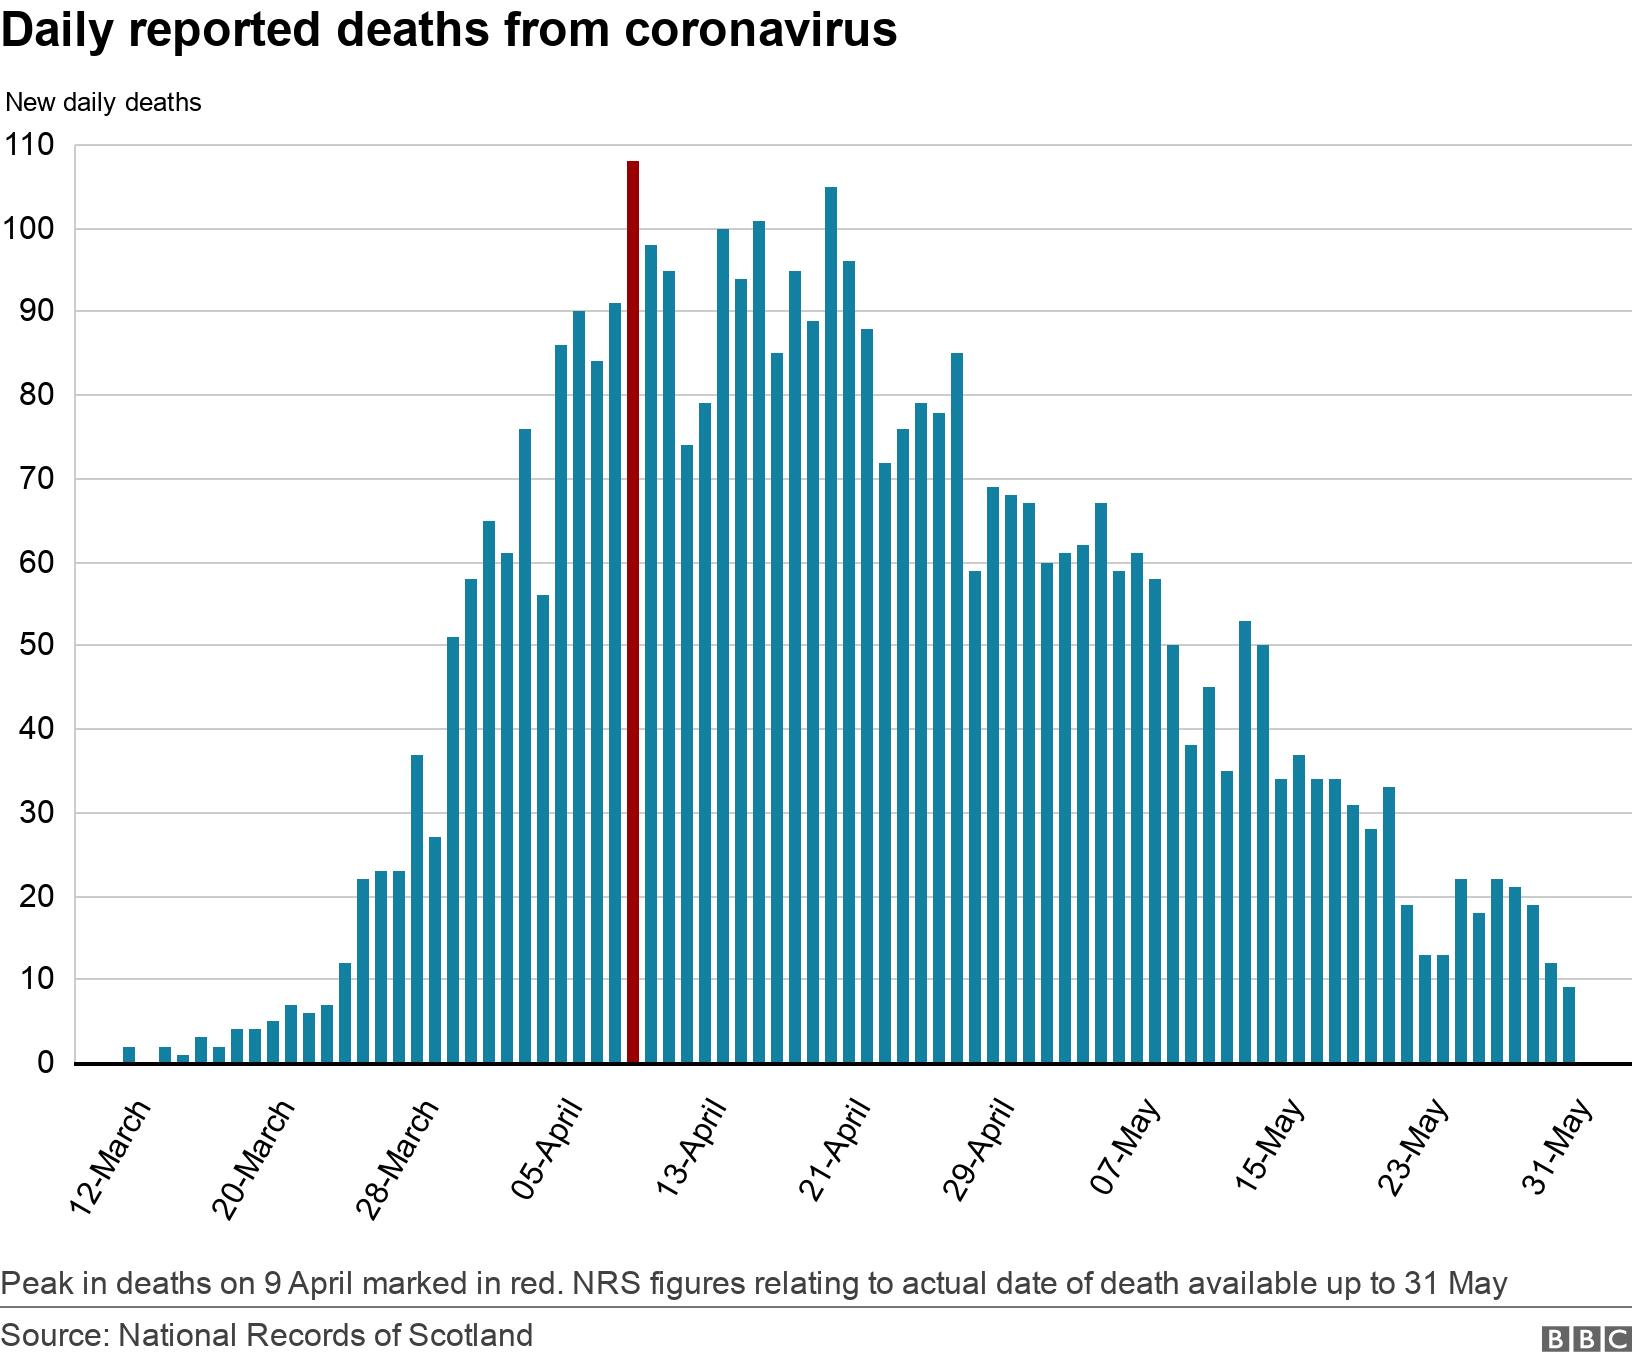 Daily reported deaths from coronavirus. .  Peak in deaths on 9 April marked in red. NRS figures relating to actual date of death available up to 31 May.